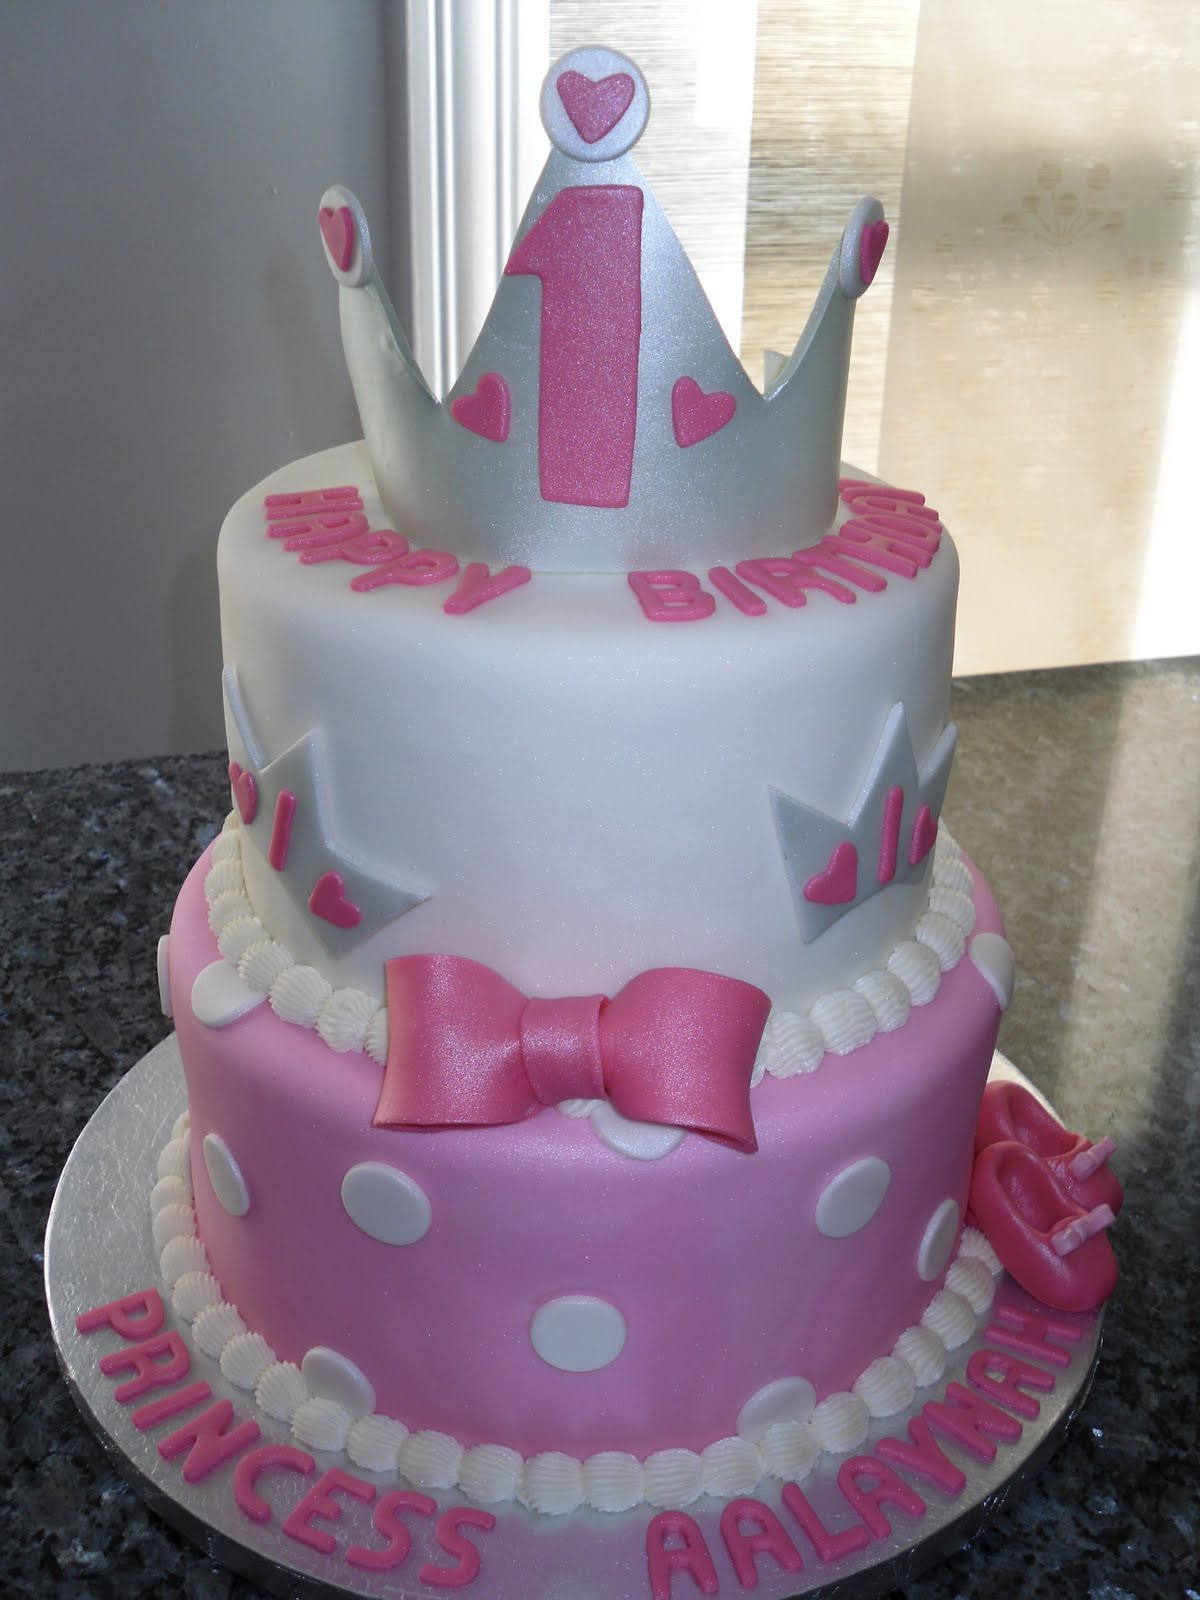 Birthday Cake For 1 Year Old Baby Girl
 Carat Cakes Two Very Special e Year Old Birthdays